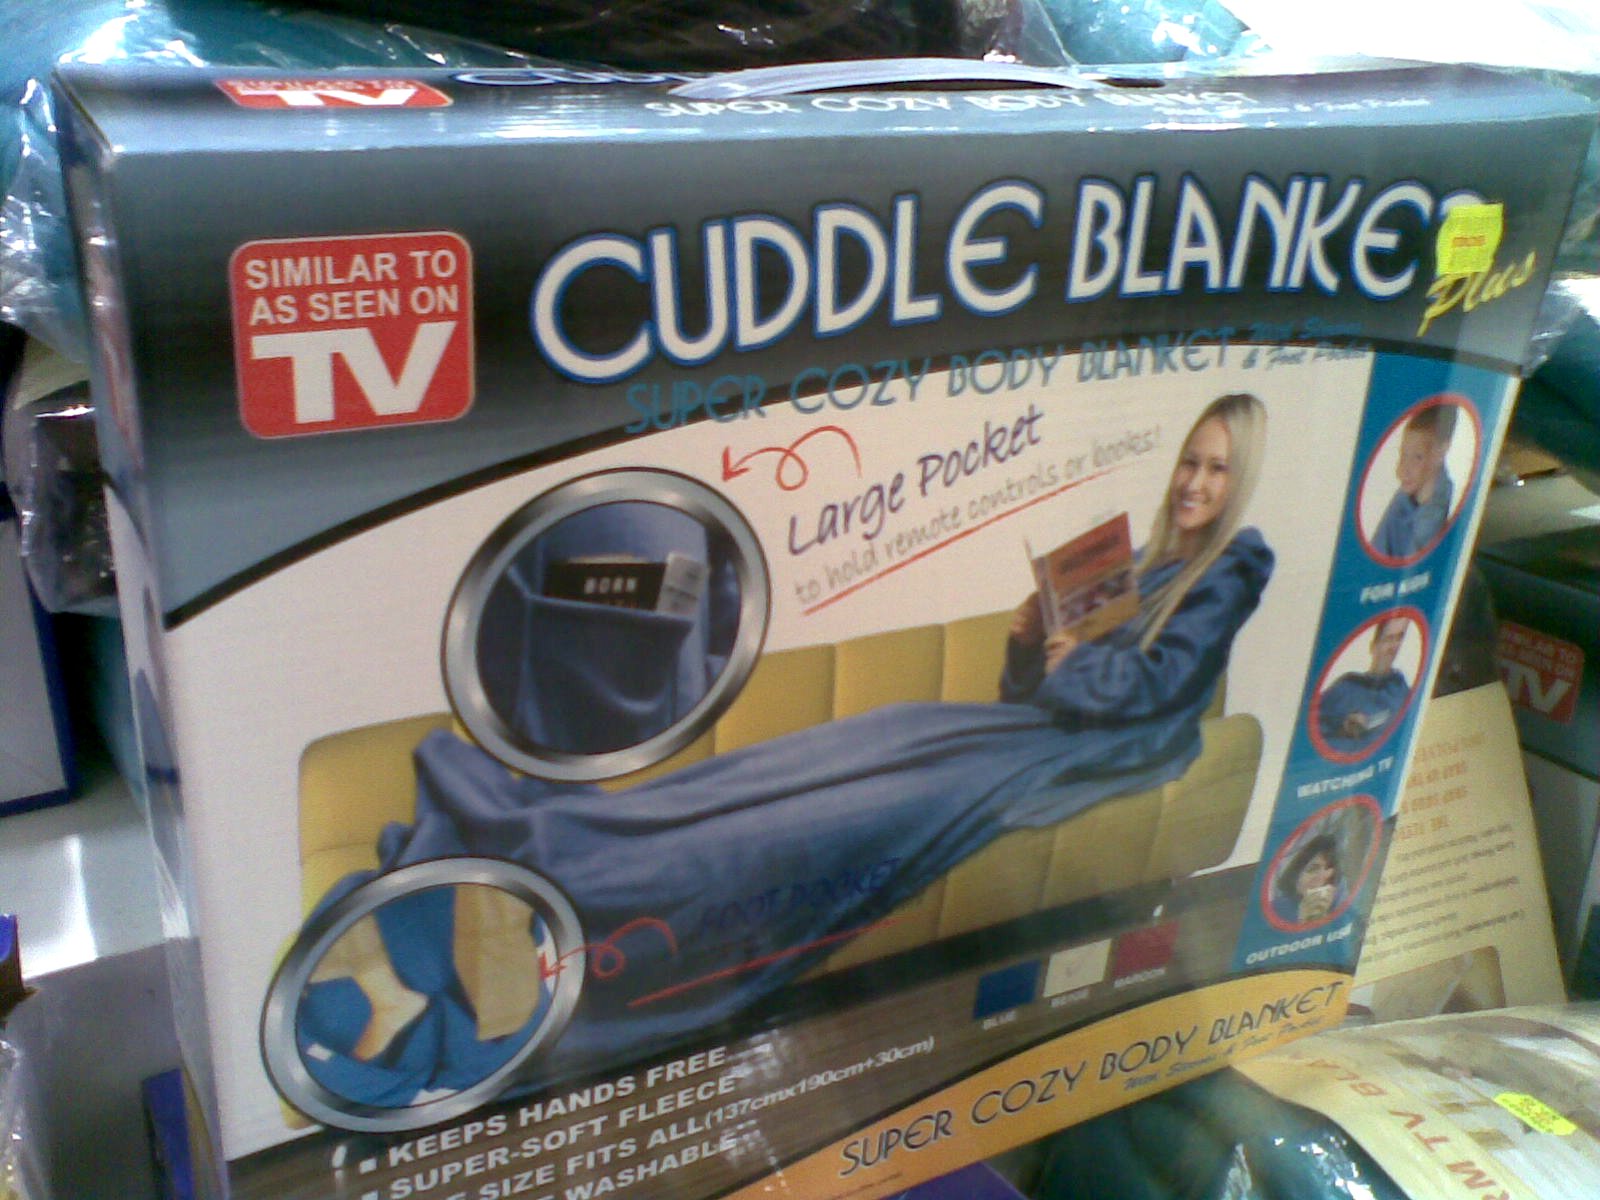 a cardboard box that contains an electric cuddle blanket